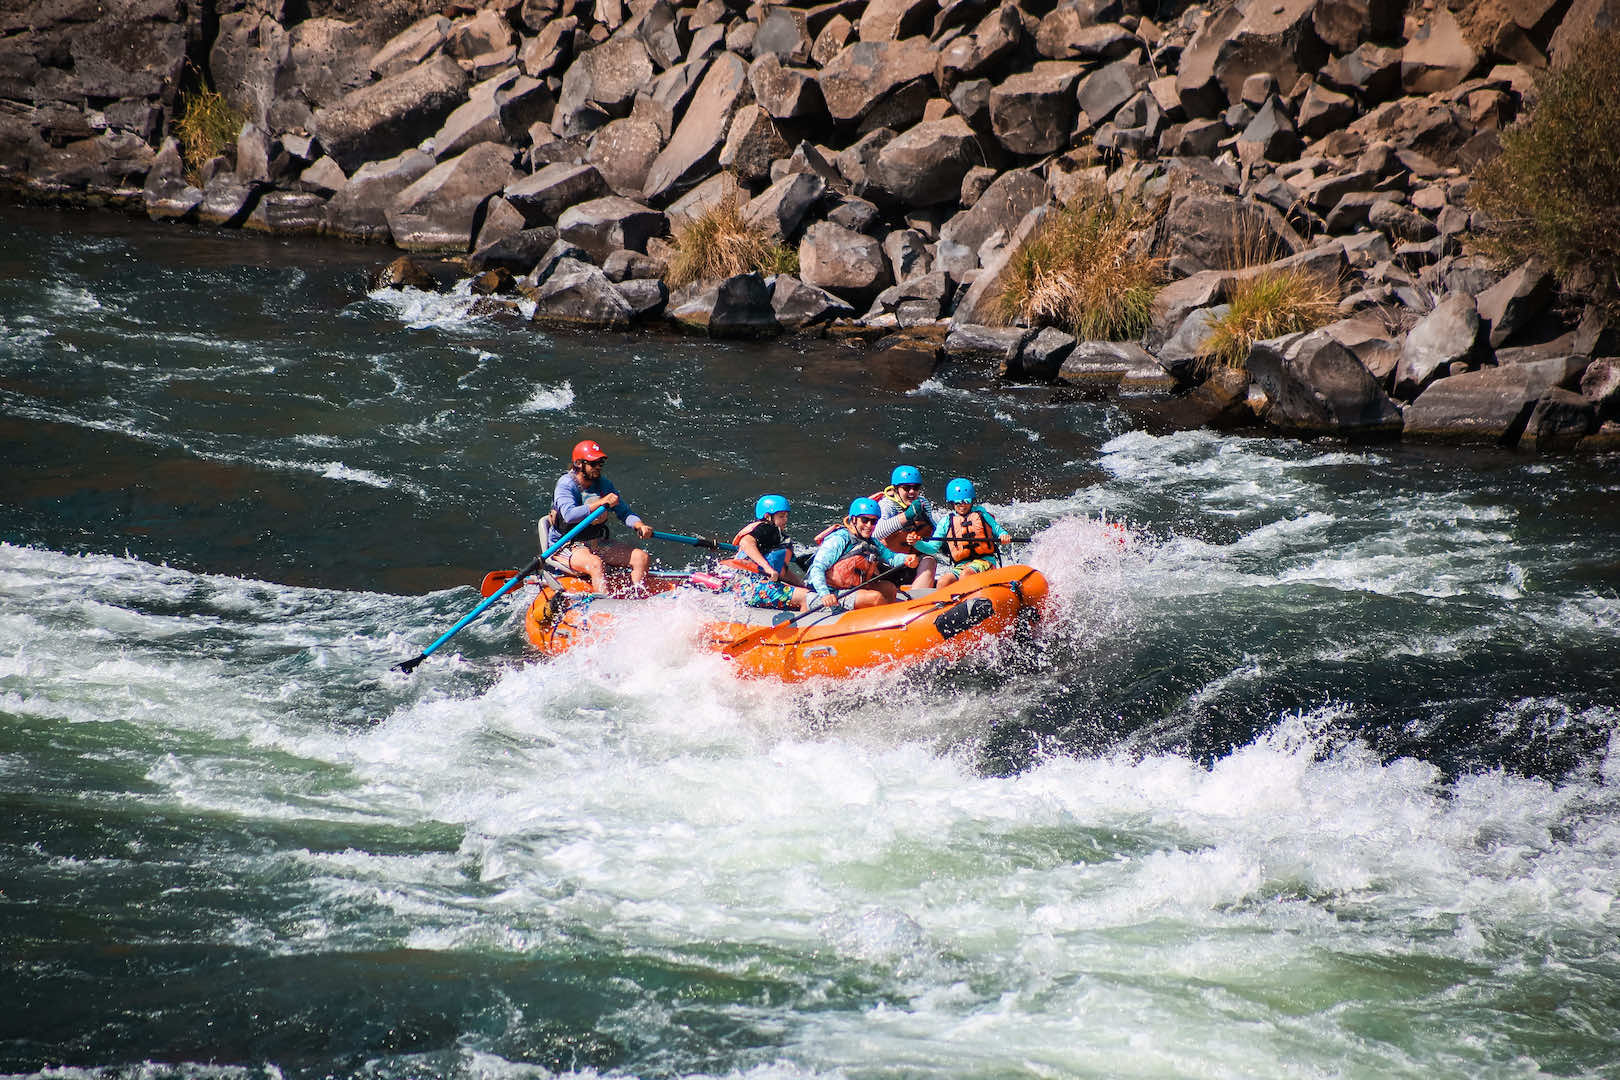 Tour group rafting on the Deschutes River